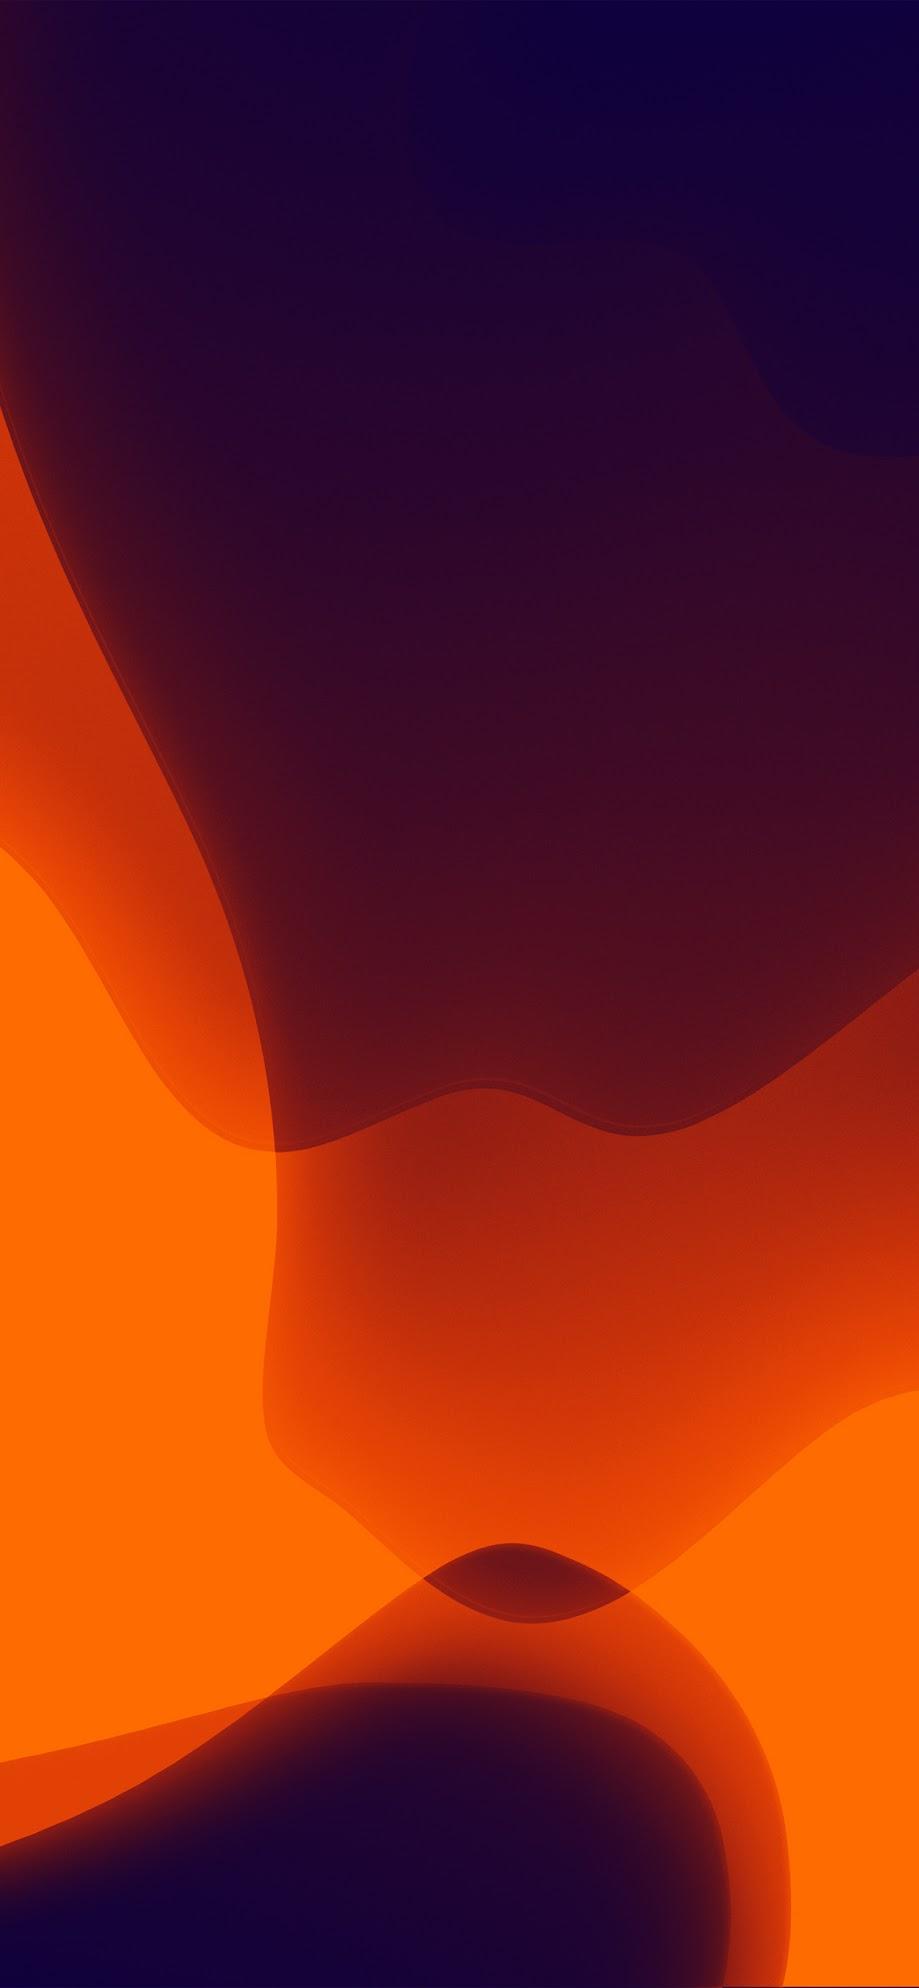 iOS 13 wallpapers in various colors for iPhone and iPad